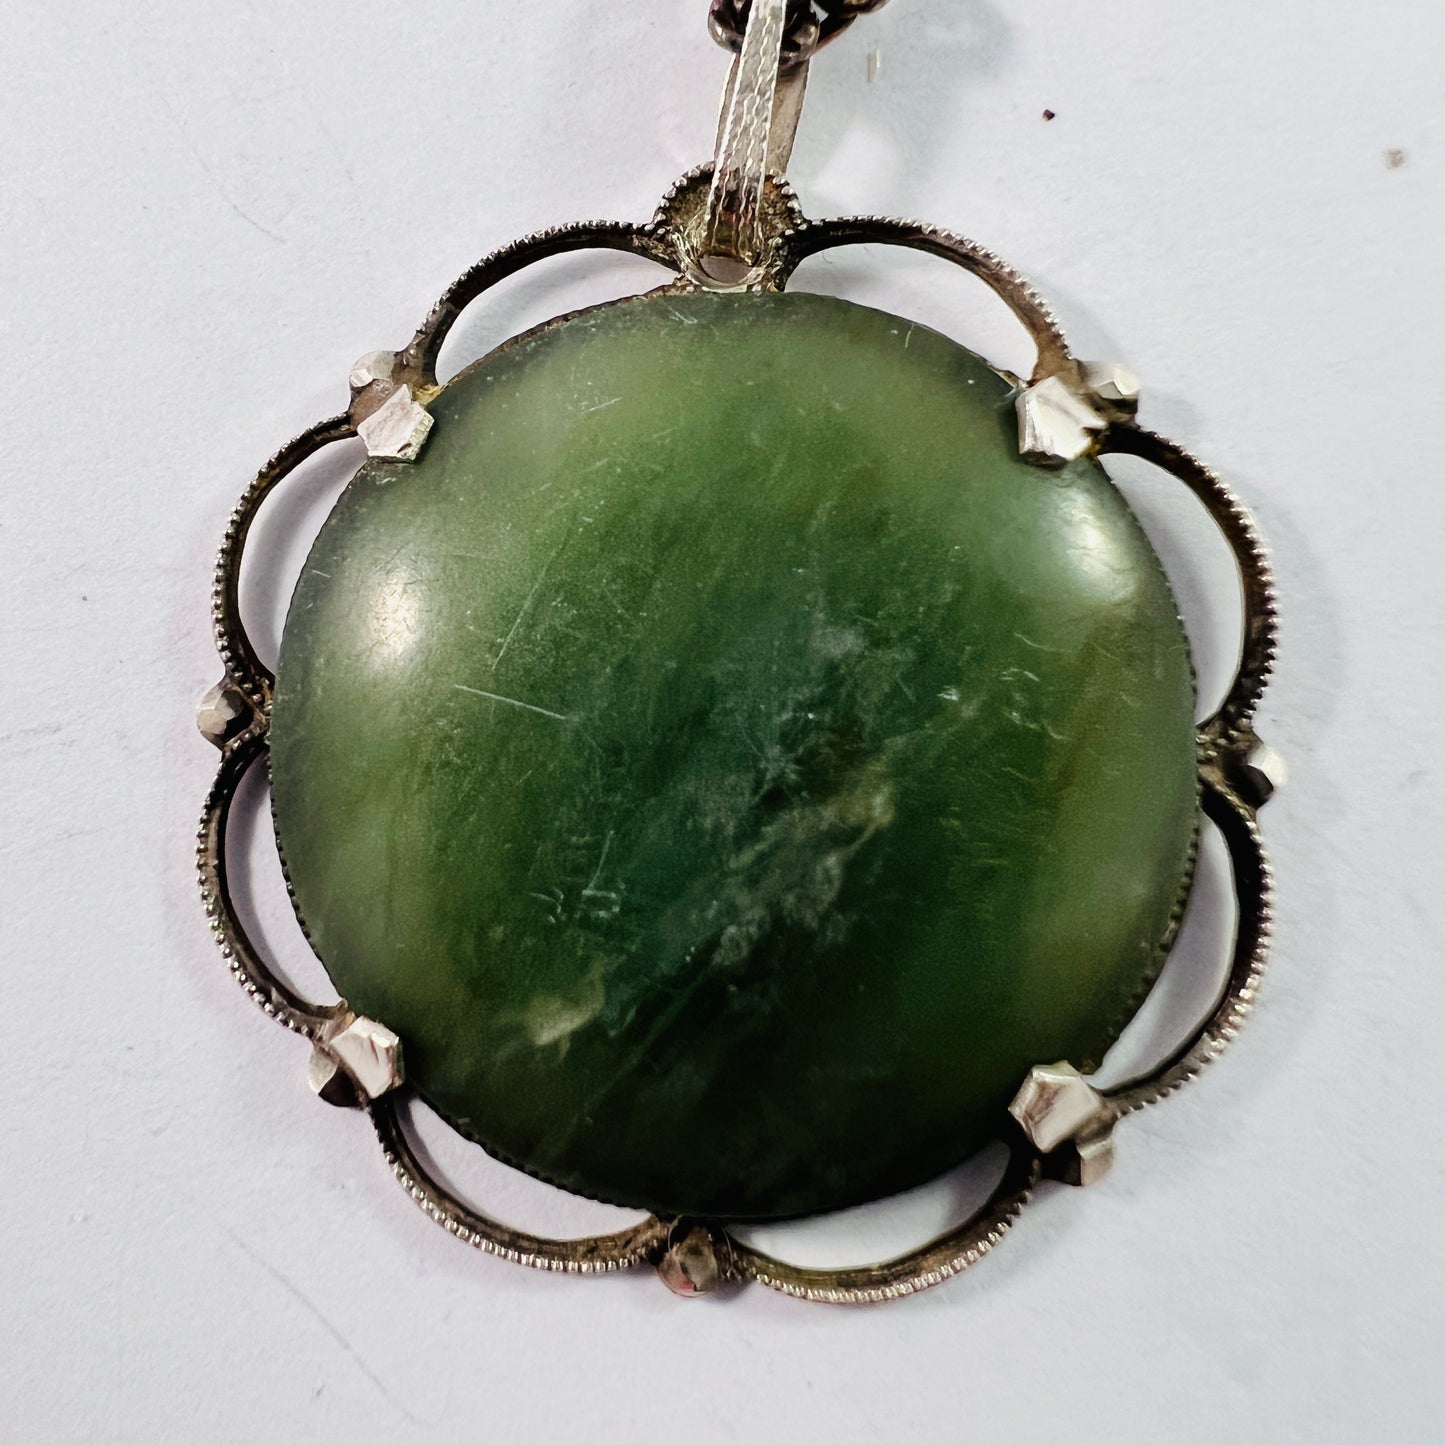 Vintage Mid Century 800 Silver Green Hardstone Pendant Long Chain Necklace.